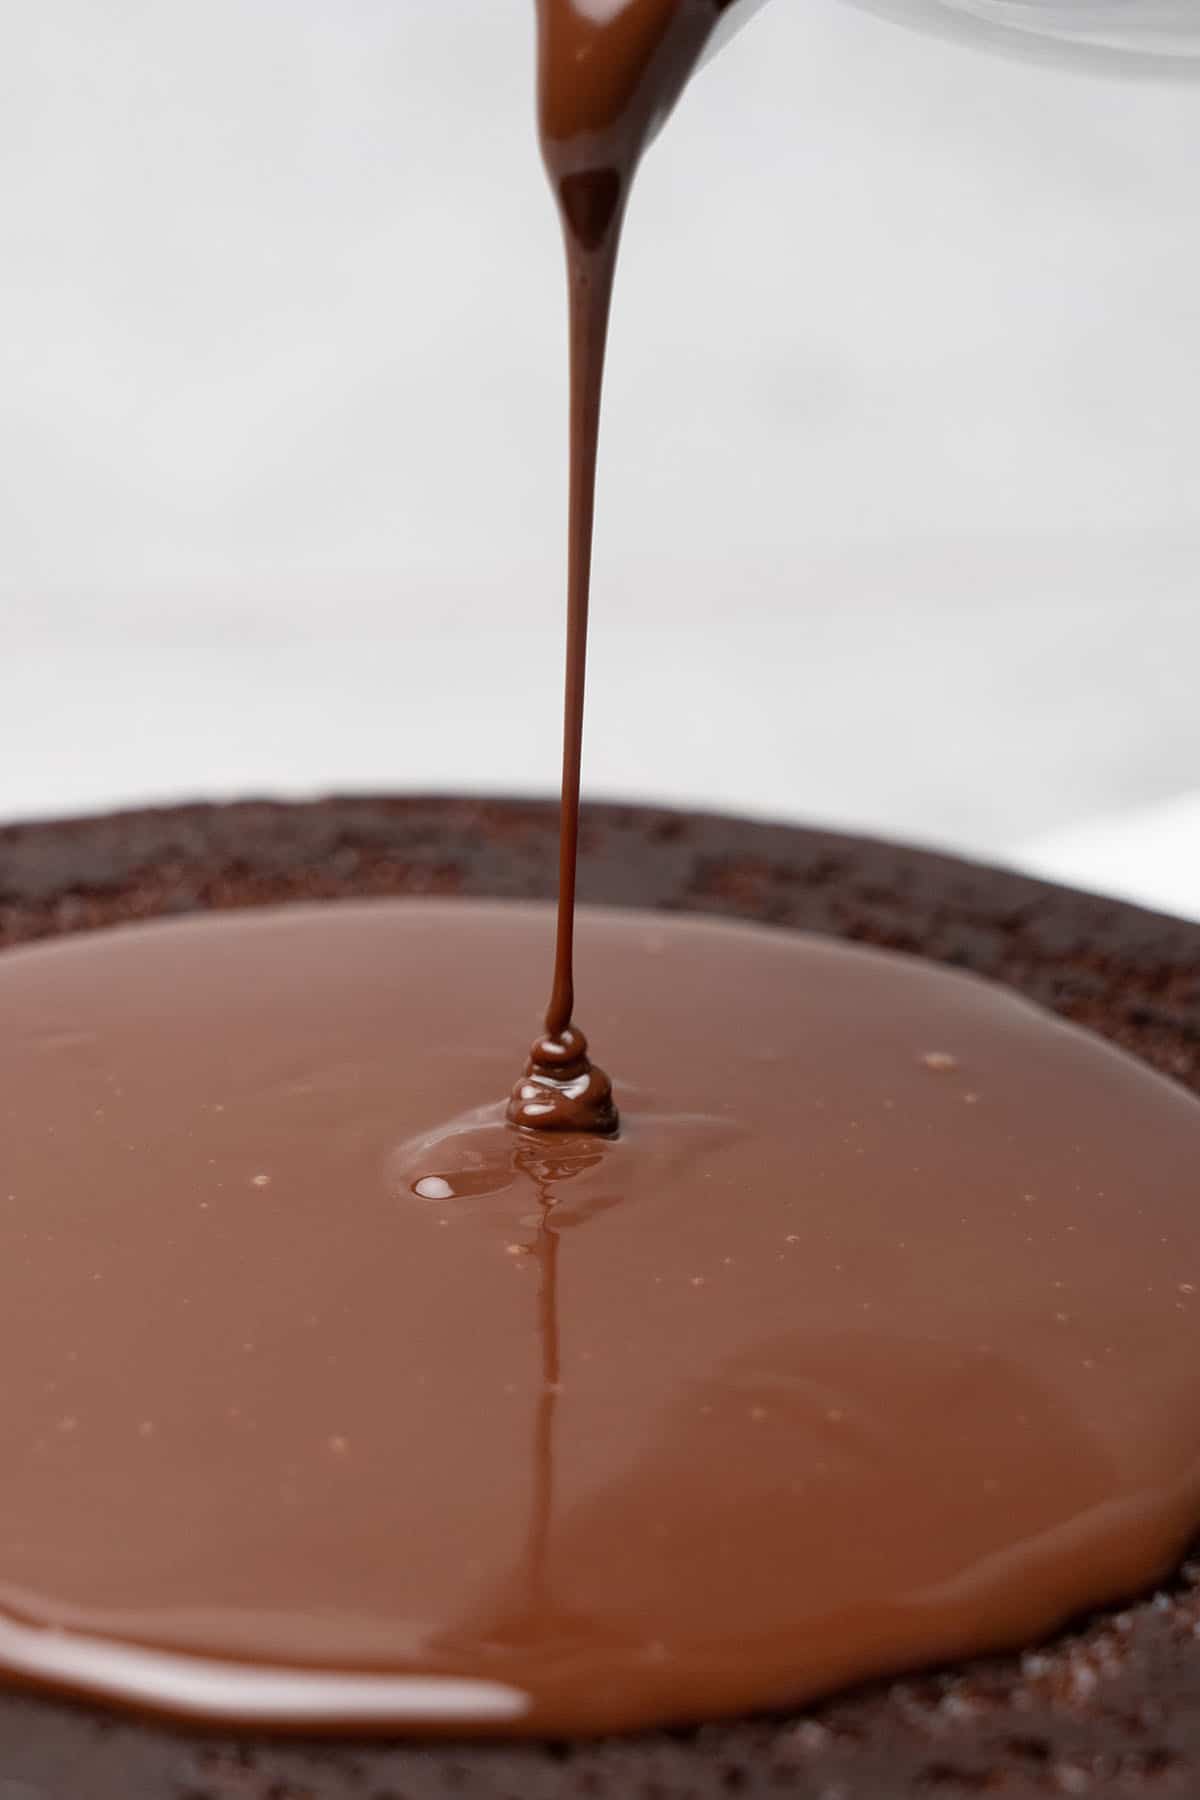 pouring chocolate ganache topping on a chocolate sponge cake.